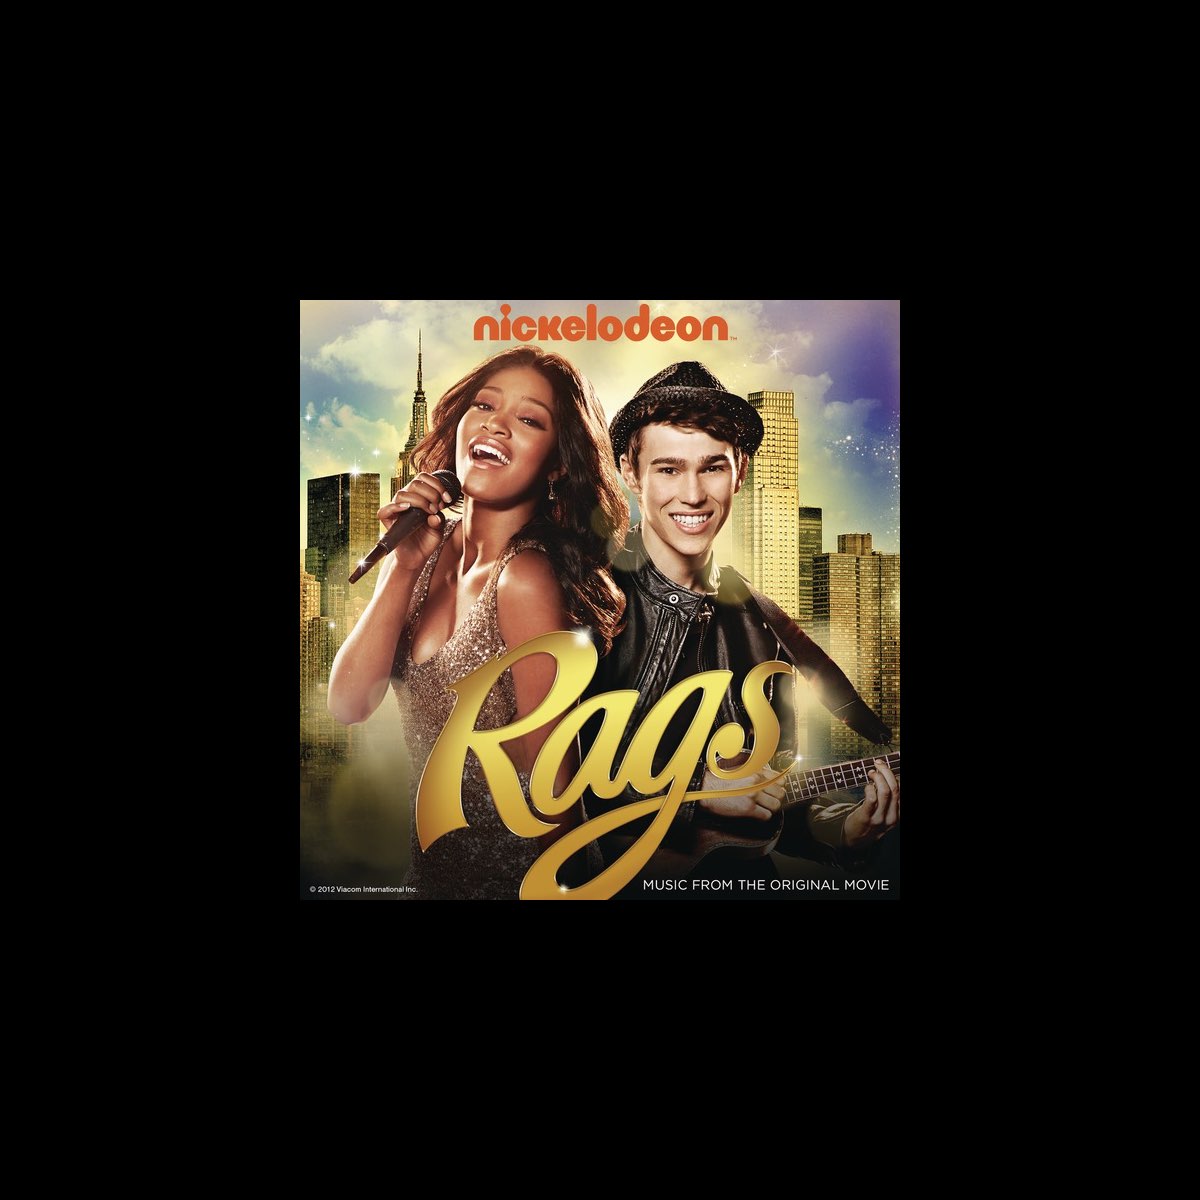 Rags (Music from the Original Movie) - Album by Rags Cast - Apple